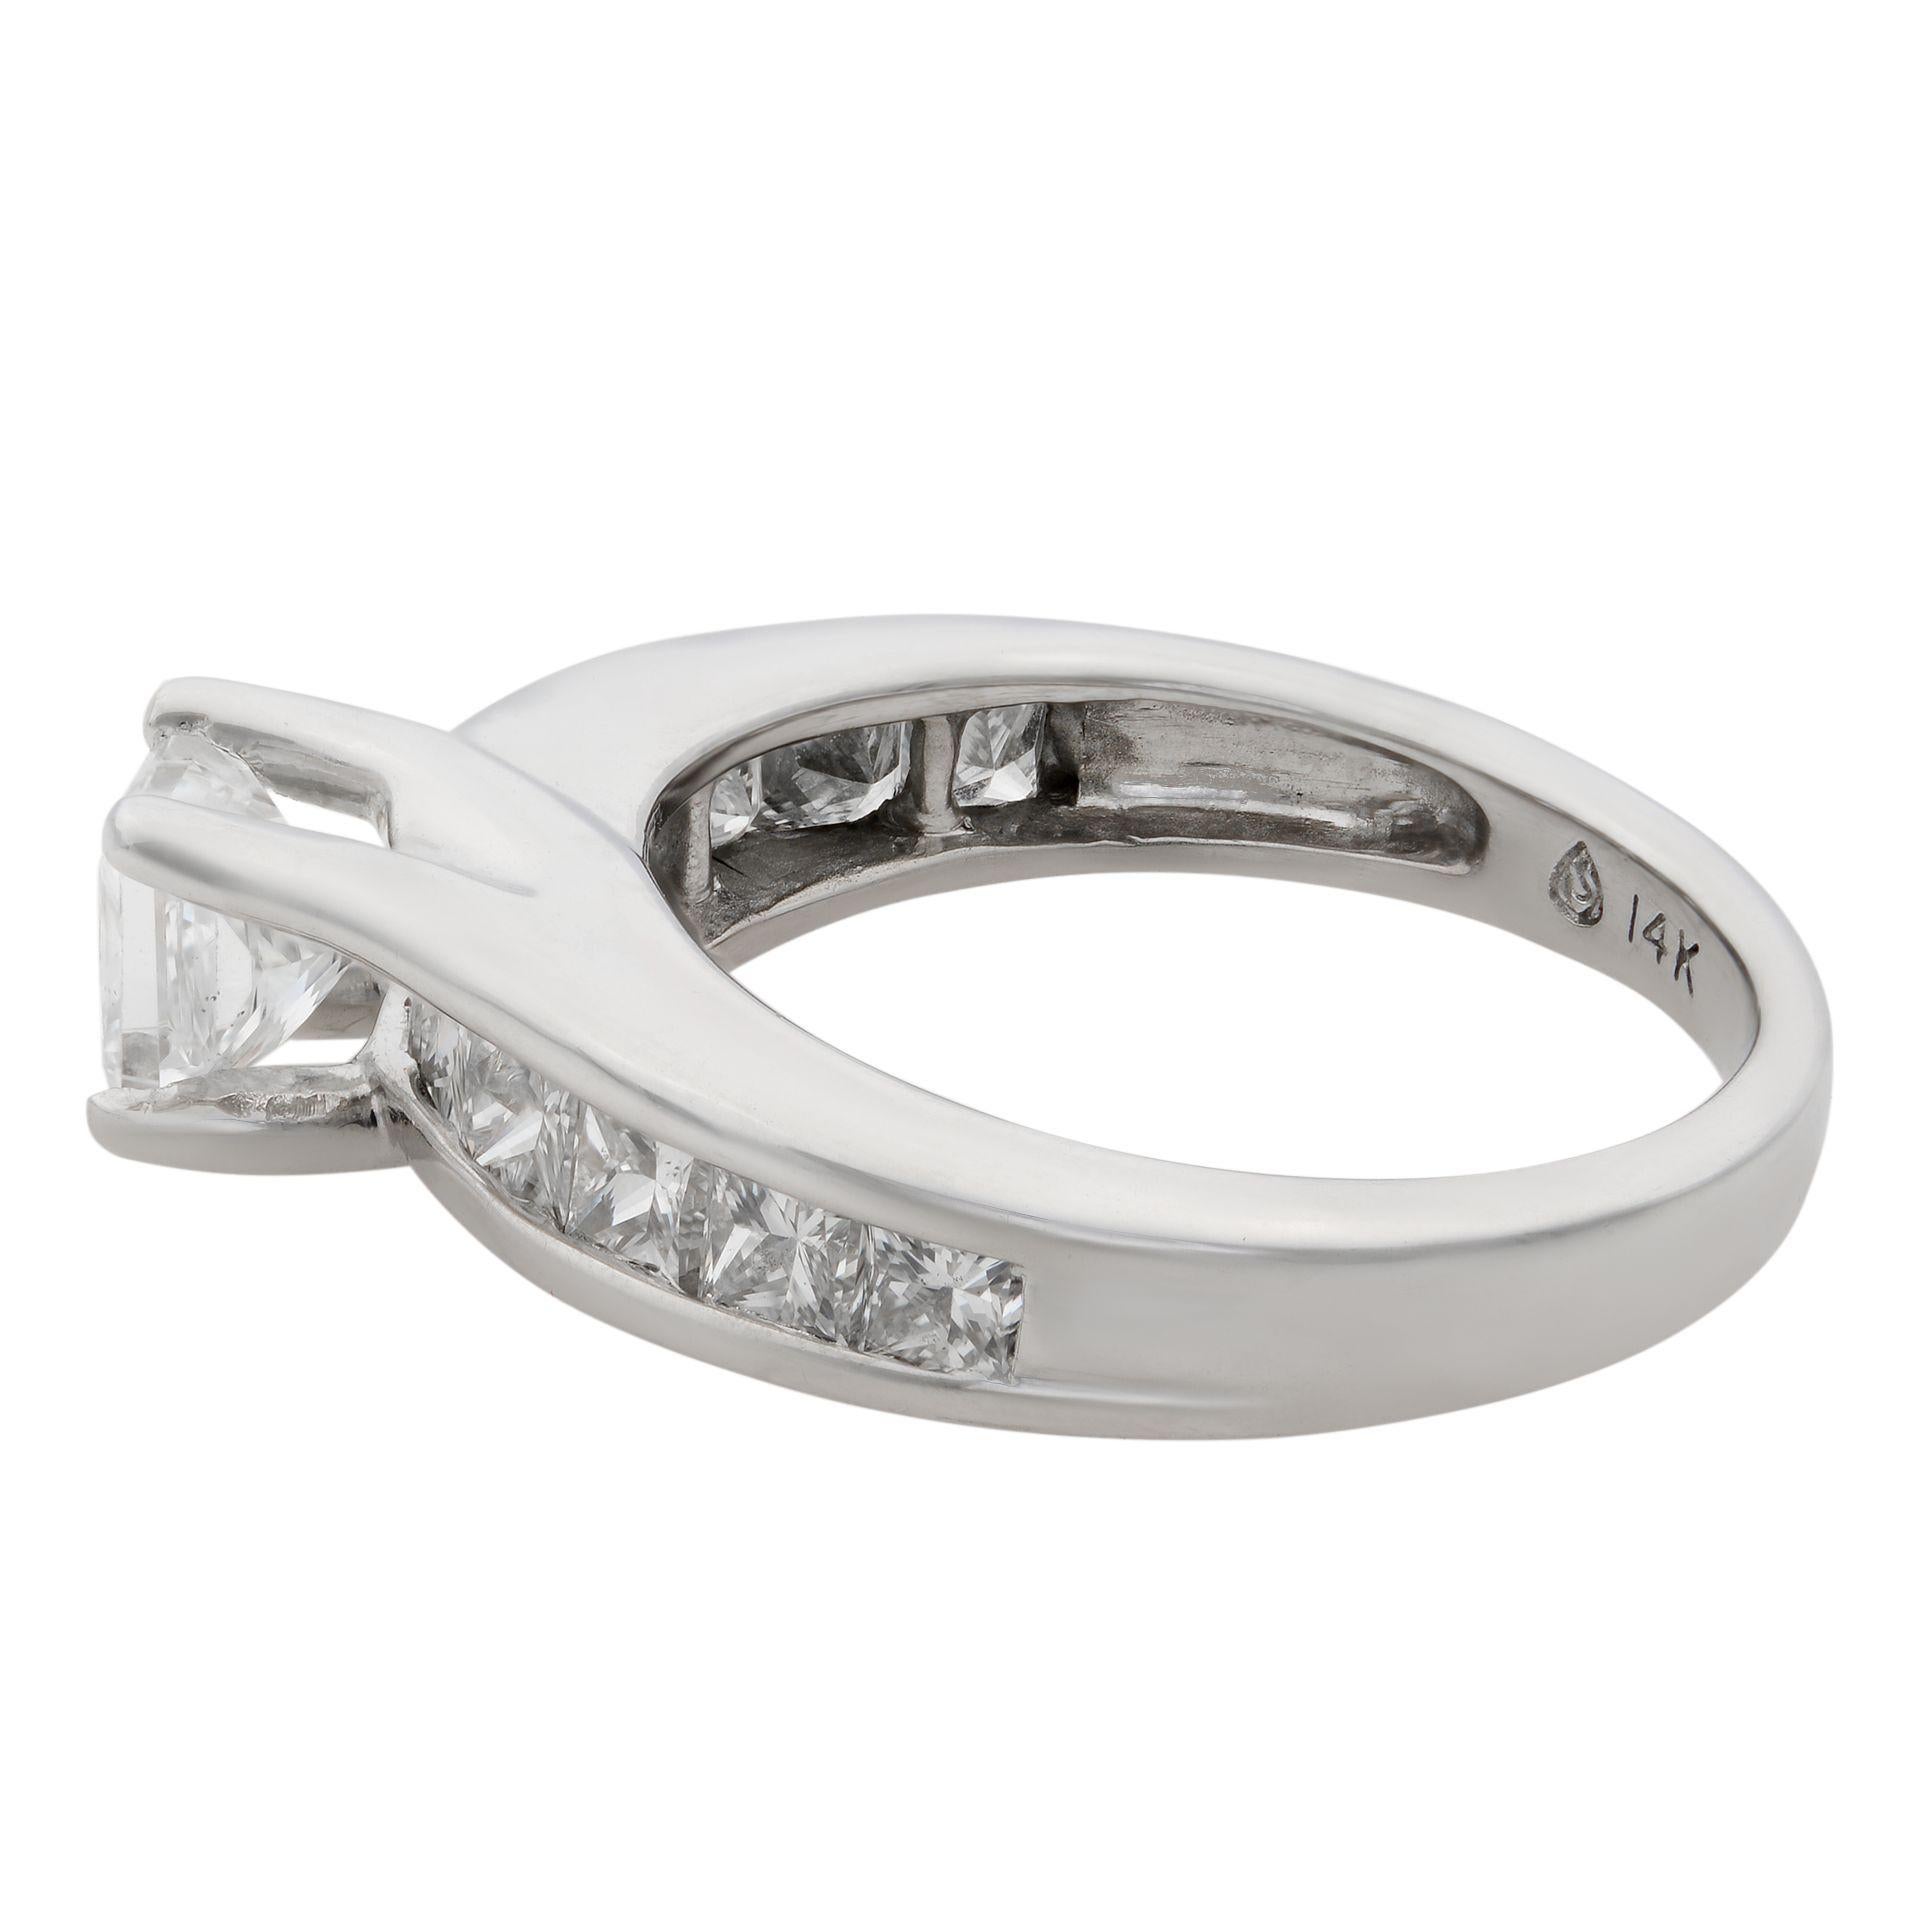 This stunning princess cut diamond engagement ring is too good to pass by. Crafted in 14k white gold, it features a 0.45ct princess cut diamond in the center of this elegant princess cut engagement ring. 
Either side of this beautiful ring is